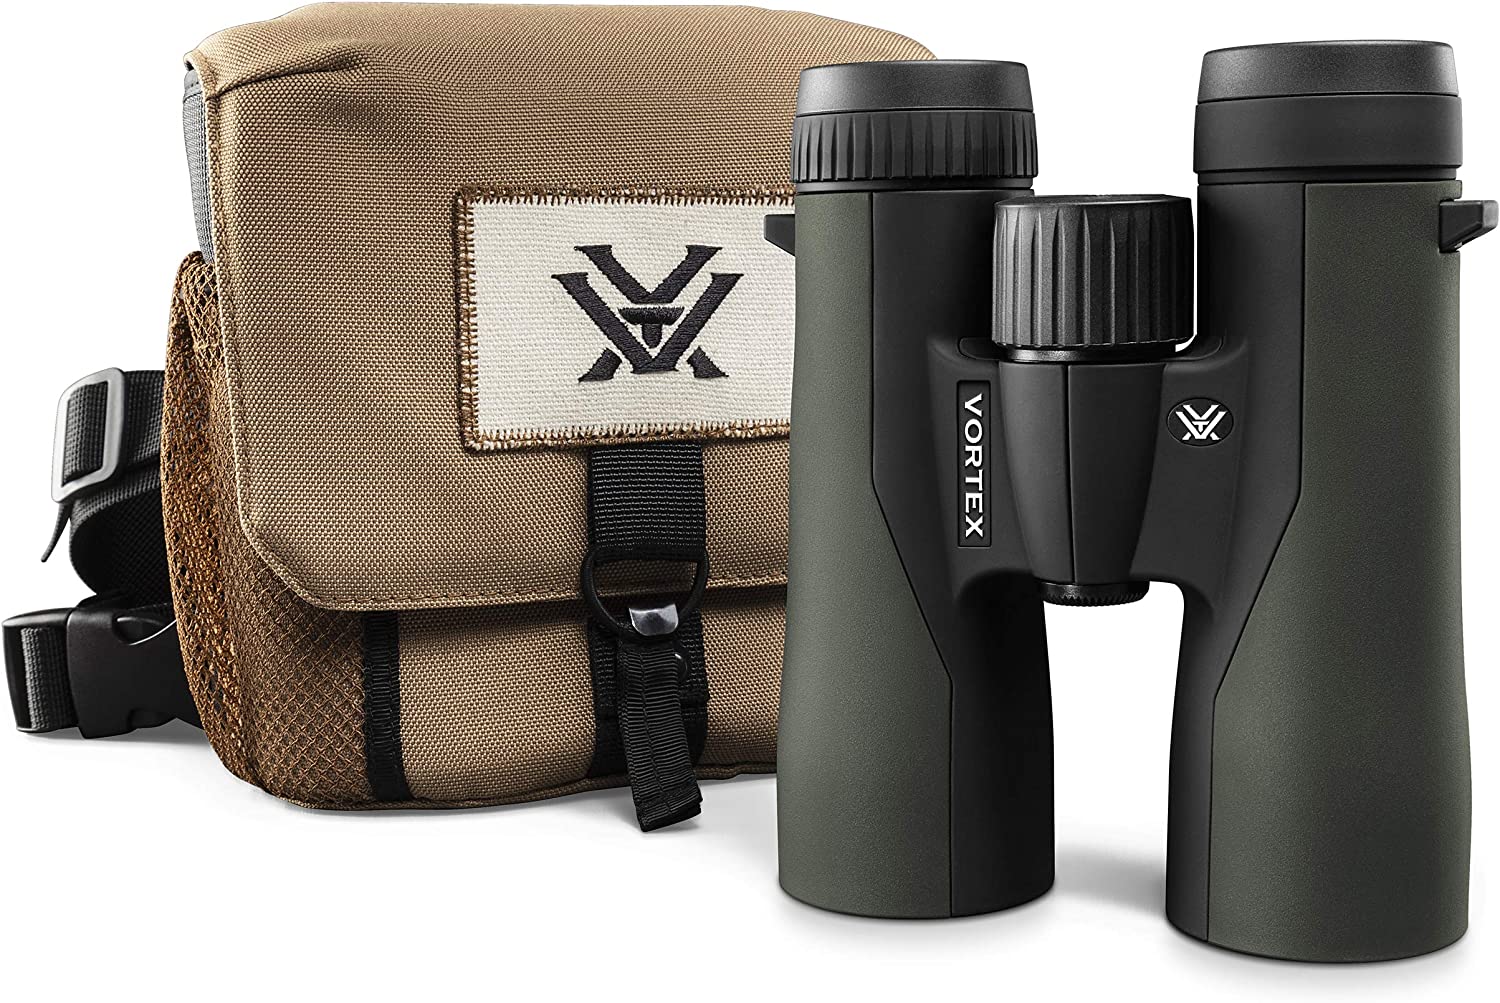 Green Vortex Crossfire Binoculars with its tan carrying case